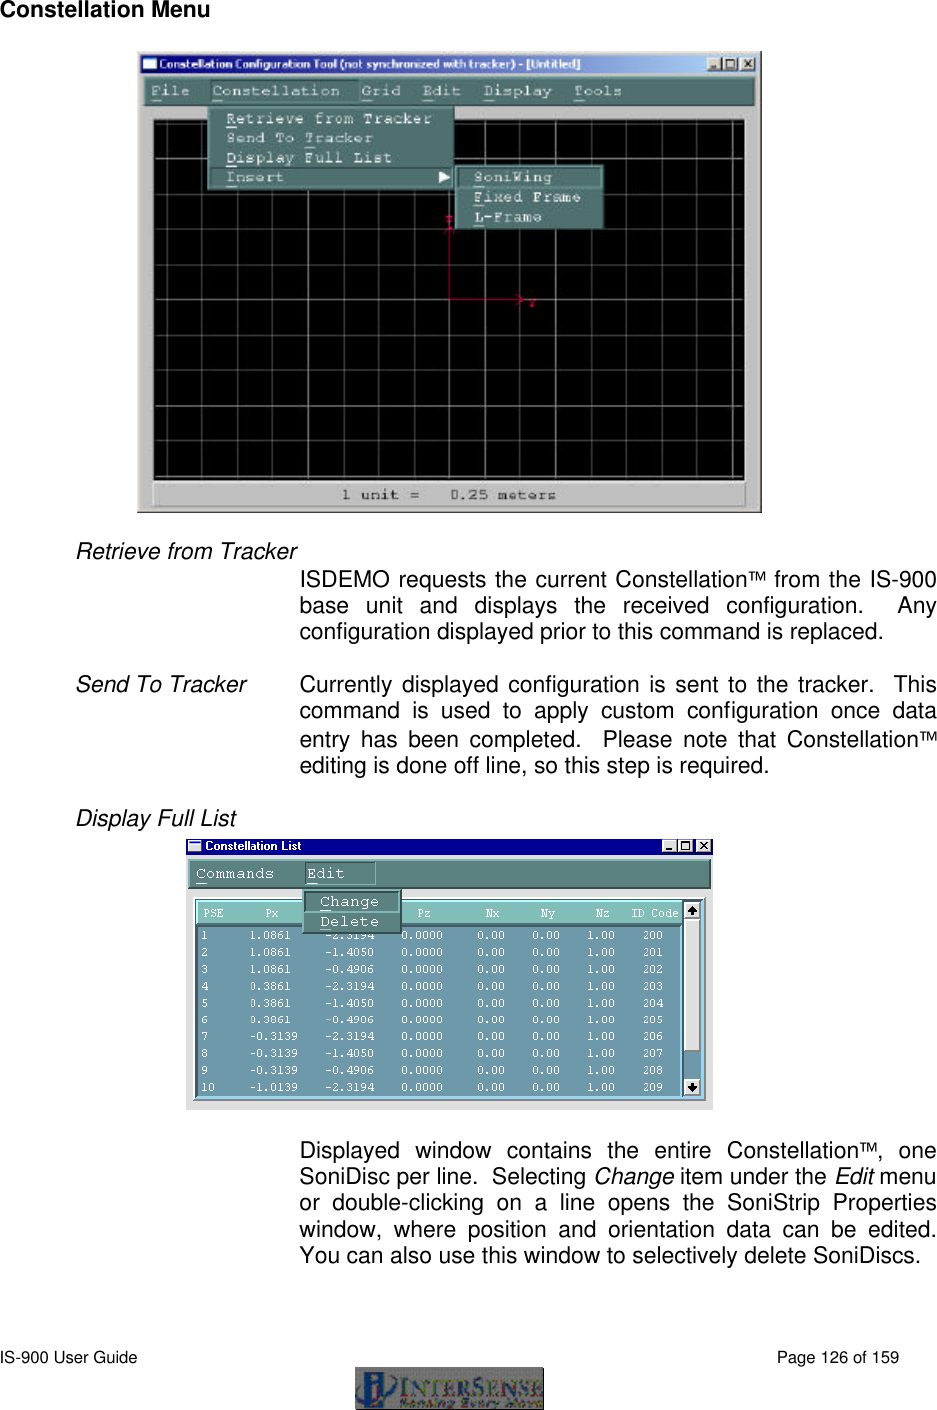  IS-900 User Guide                                                                                                                                          Page 126 of 159  Constellation Menu  Retrieve from Tracker  ISDEMO requests the current Constellation from the IS-900 base unit and displays the received configuration.  Any configuration displayed prior to this command is replaced.  Send To Tracker Currently displayed configuration is sent to the tracker.  This command is used to apply custom configuration once data entry has been completed.  Please note that Constellation editing is done off line, so this step is required.  Display Full List  Displayed window contains the entire Constellation, one SoniDisc per line.  Selecting Change item under the Edit menu or double-clicking on a line opens the SoniStrip Properties window, where position and orientation data can be edited.  You can also use this window to selectively delete SoniDiscs.   